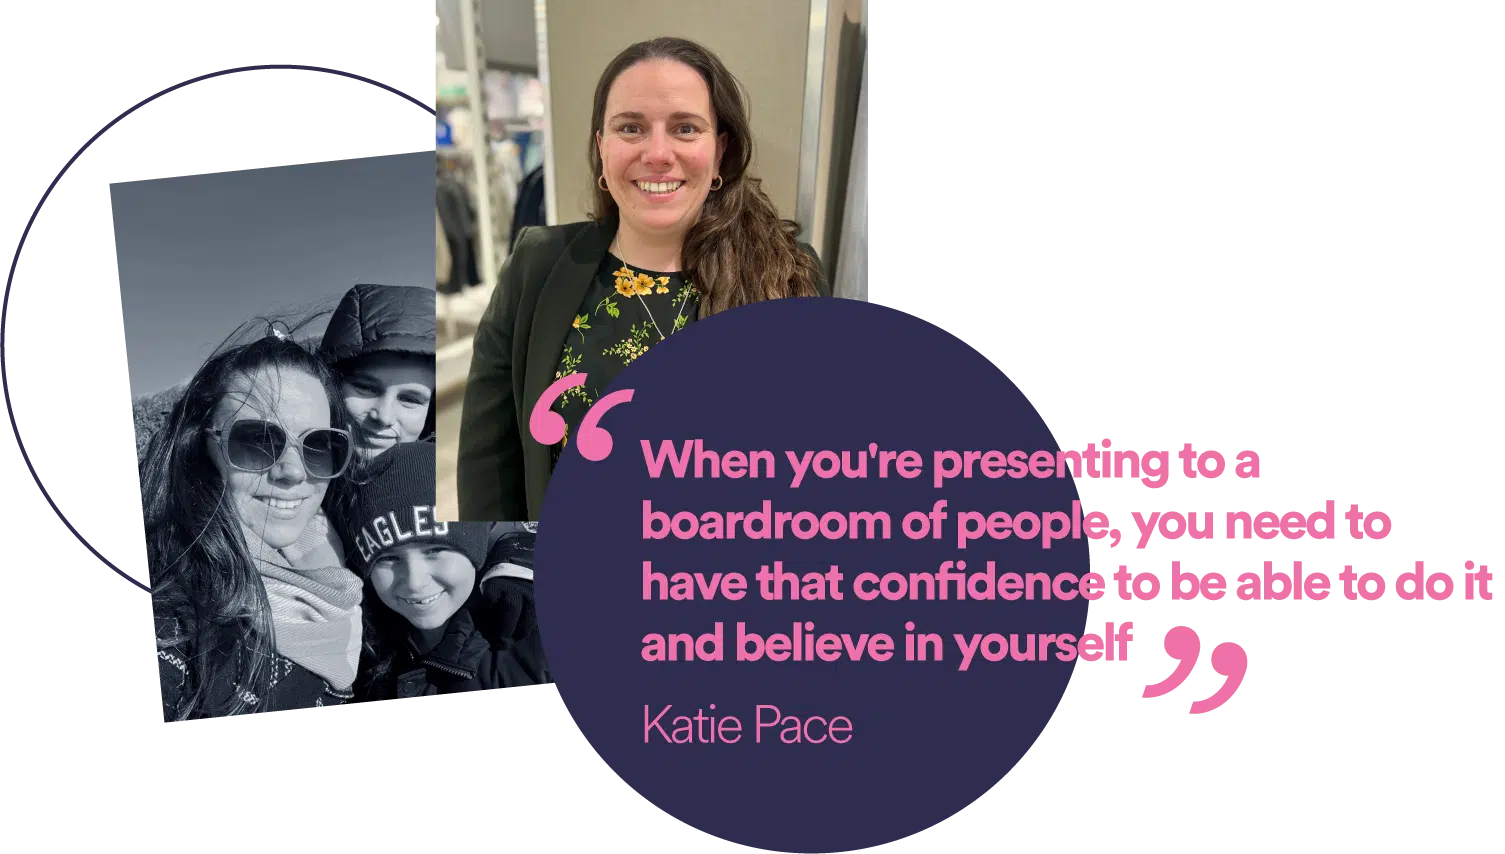 “When you're presenting to a boardroom of people, you need to have that confidence to be able to do it and believe in yourself.” Katie Pace - International Women's Day